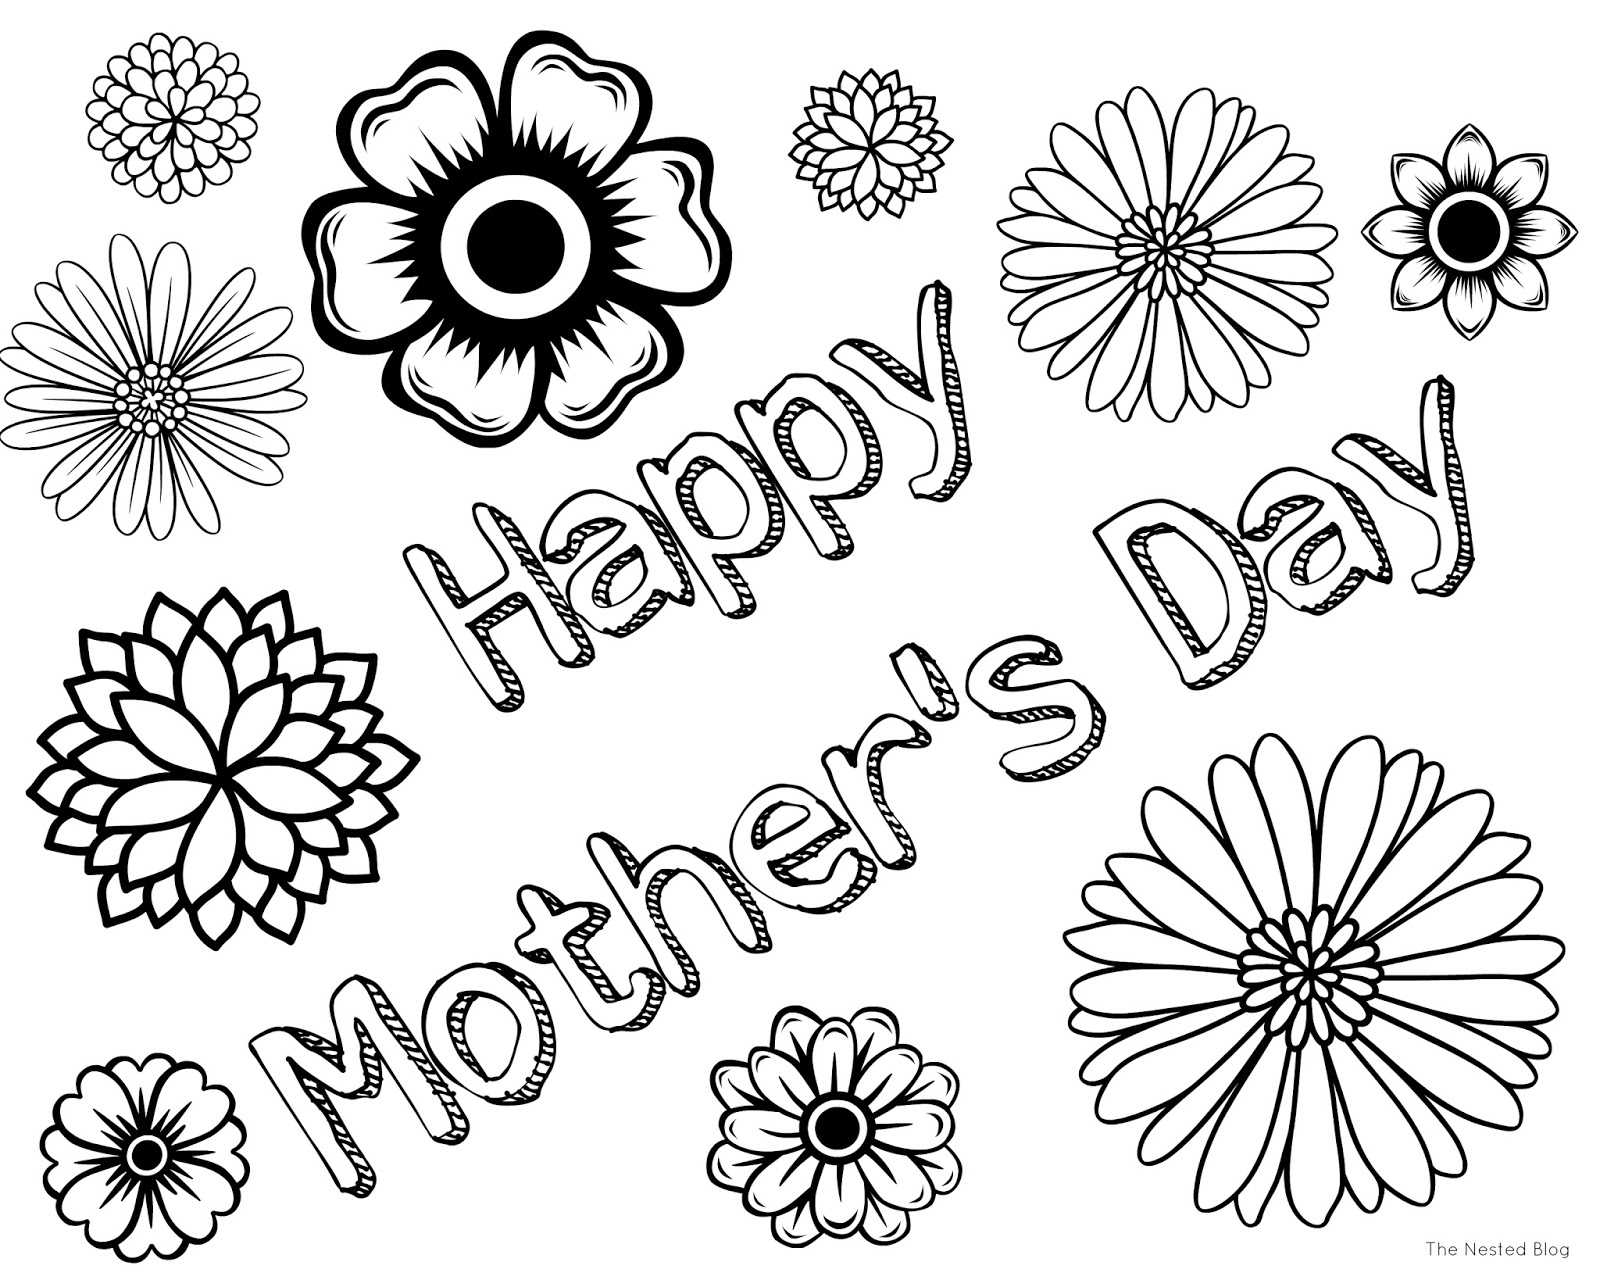 Mother's day 2016 Colouring Pages For Kids And Youngs | Mothers Day In